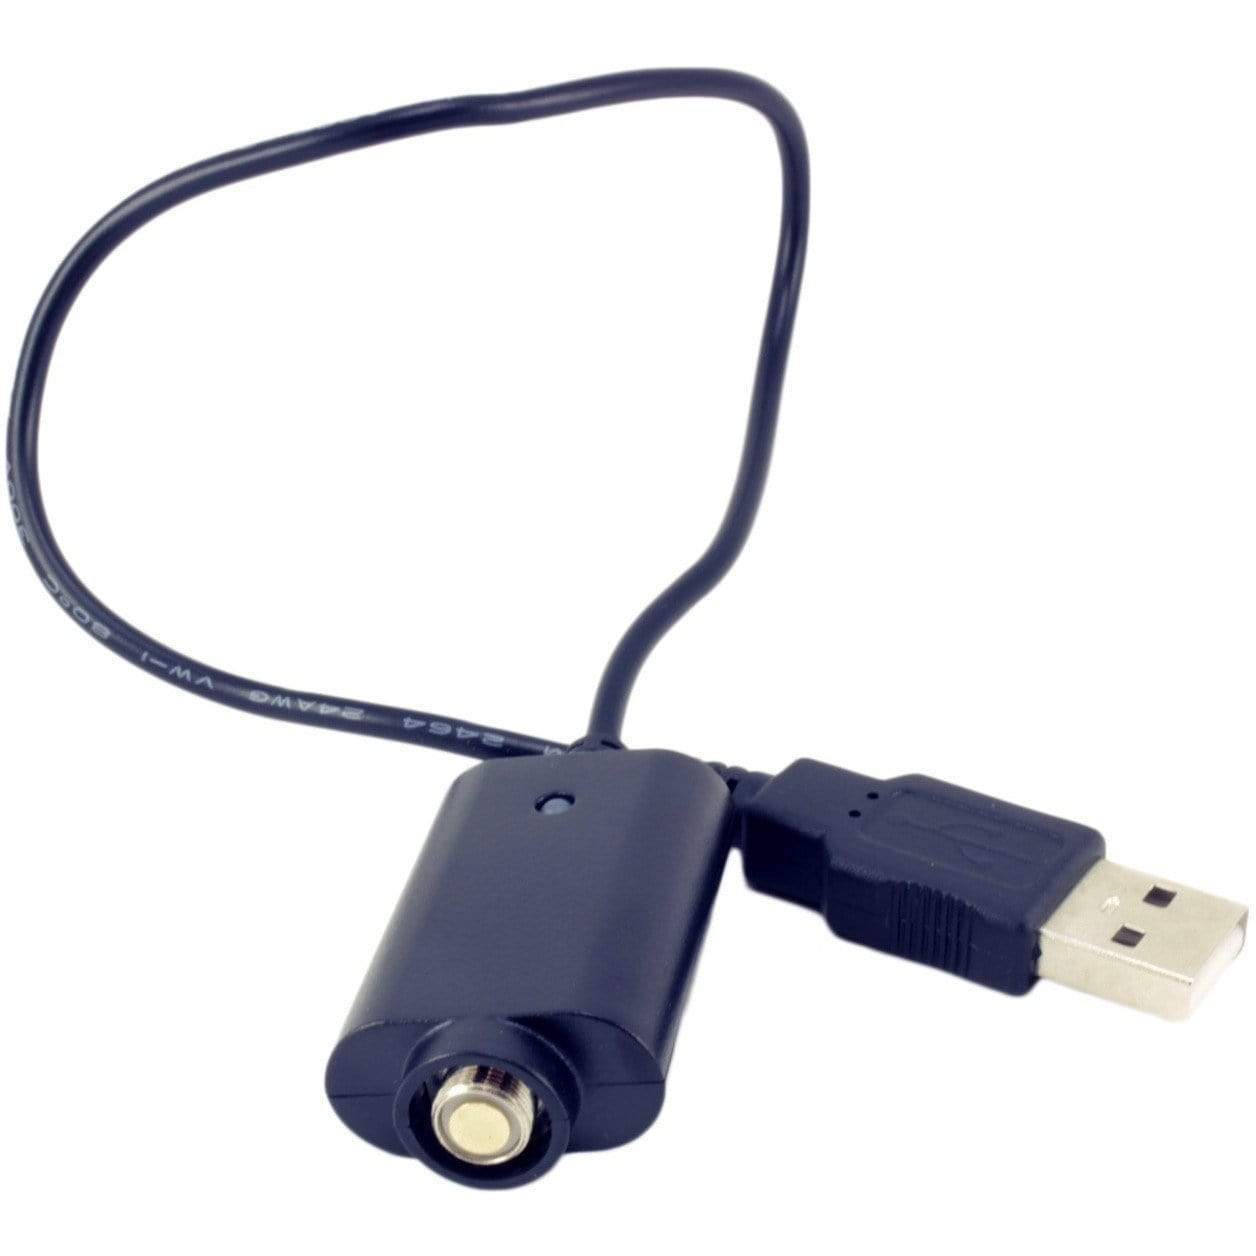 USB eGo Charging Cable Default Chargers